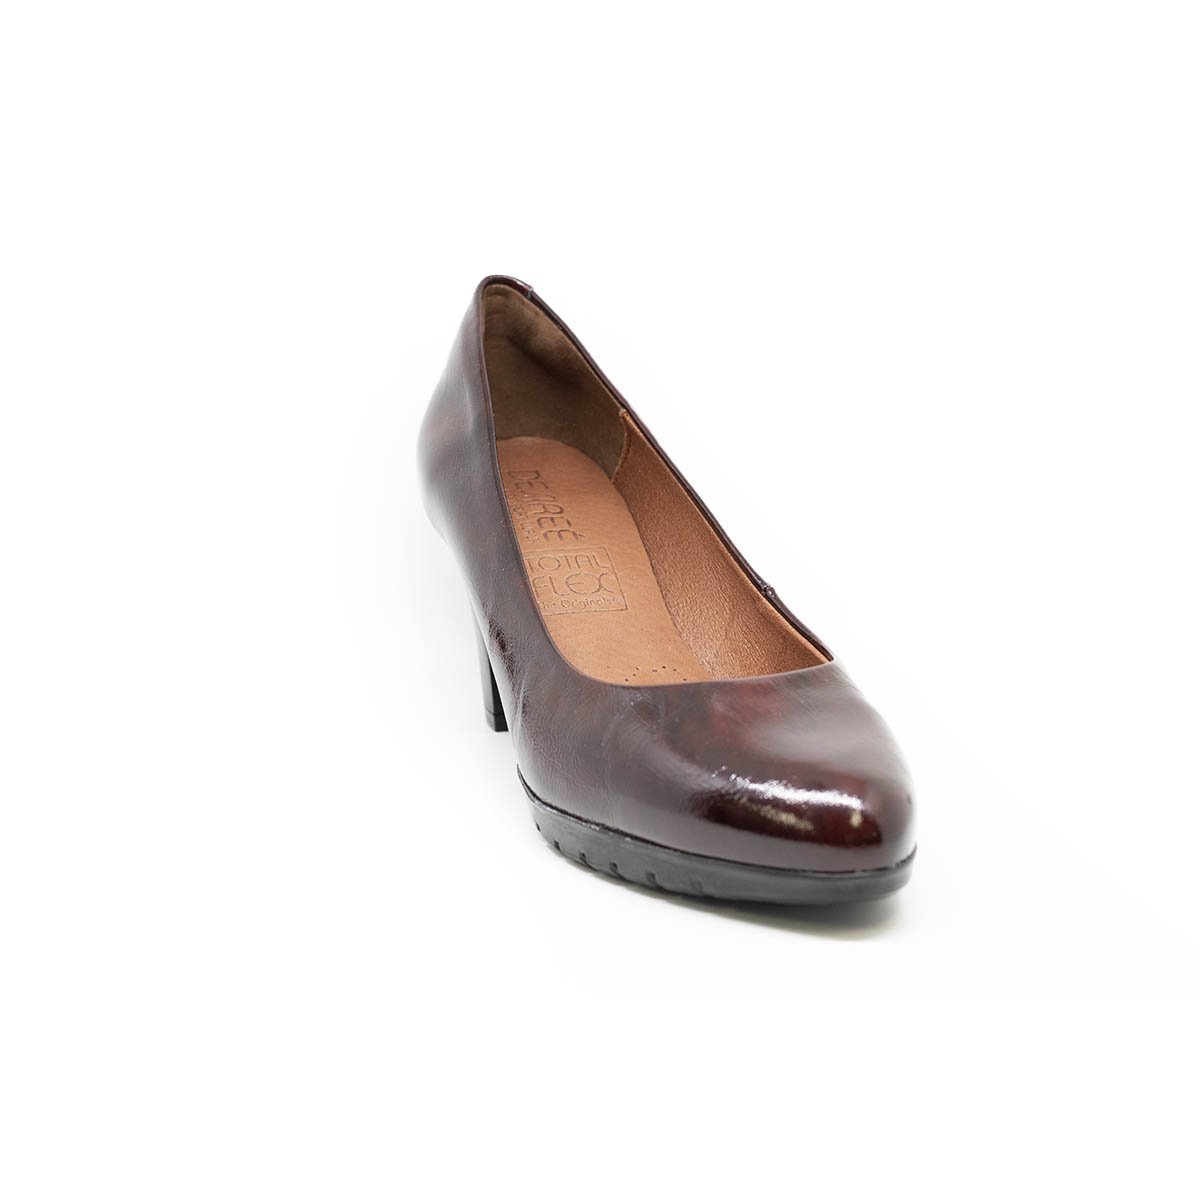 Desiree Shoes Davine DAVINE - Clearance Shoes Burgundy / 7 / 38  Available at Illusions Lingerie